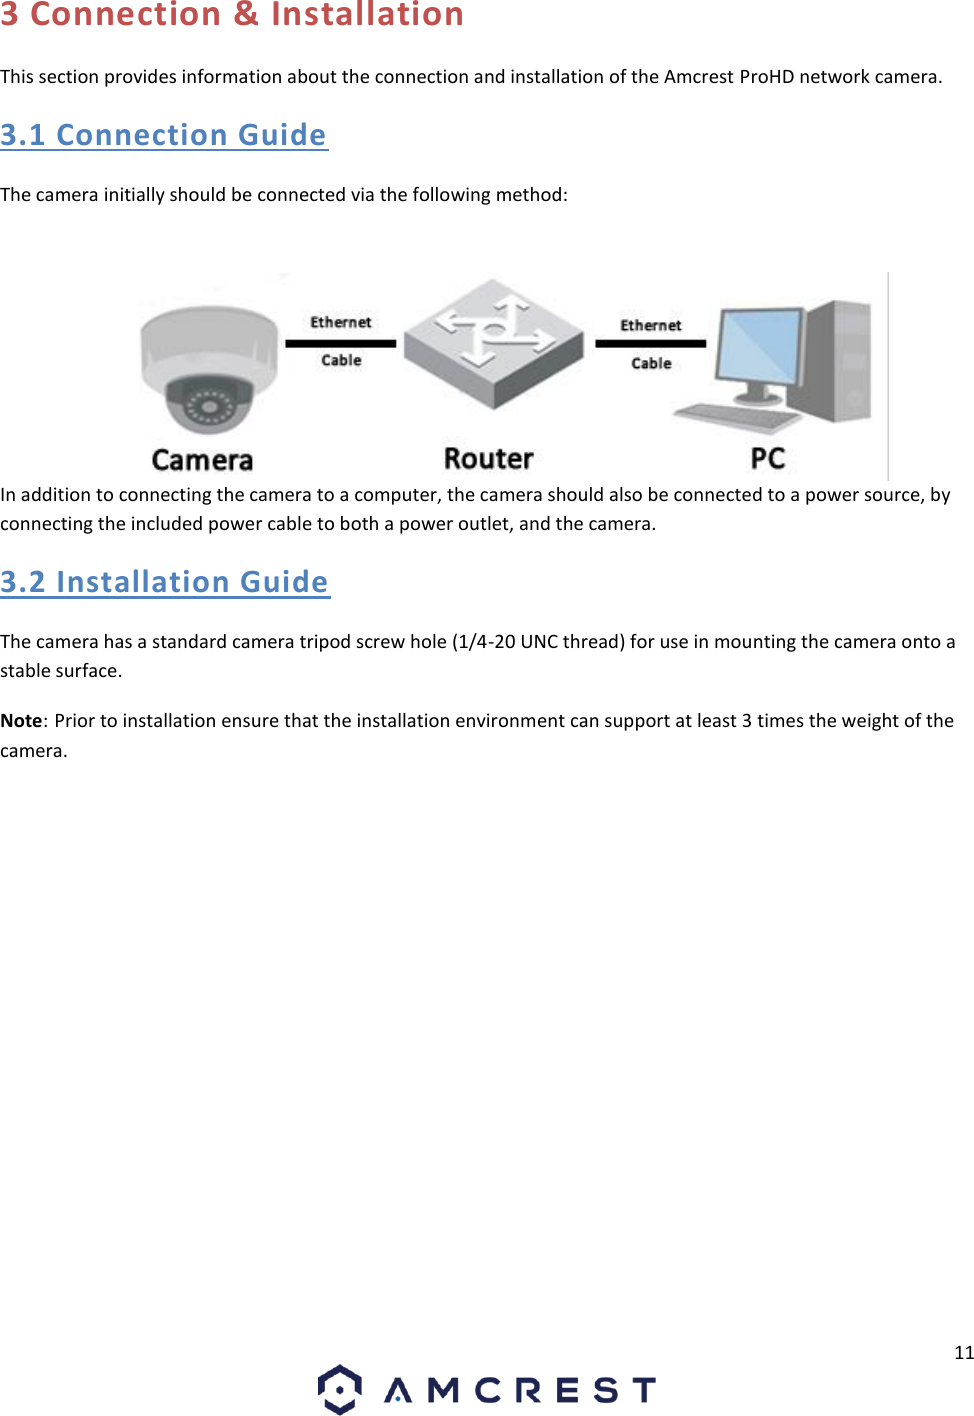 11  3 Connection &amp; Installation This section provides information about the connection and installation of the Amcrest ProHD network camera. 3.1 Connection Guide The camera initially should be connected via the following method:  In addition to connecting the camera to a computer, the camera should also be connected to a power source, by connecting the included power cable to both a power outlet, and the camera. 3.2 Installation Guide The camera has a standard camera tripod screw hole (1/4-20 UNC thread) for use in mounting the camera onto a stable surface.  Note: Prior to installation ensure that the installation environment can support at least 3 times the weight of the camera.   